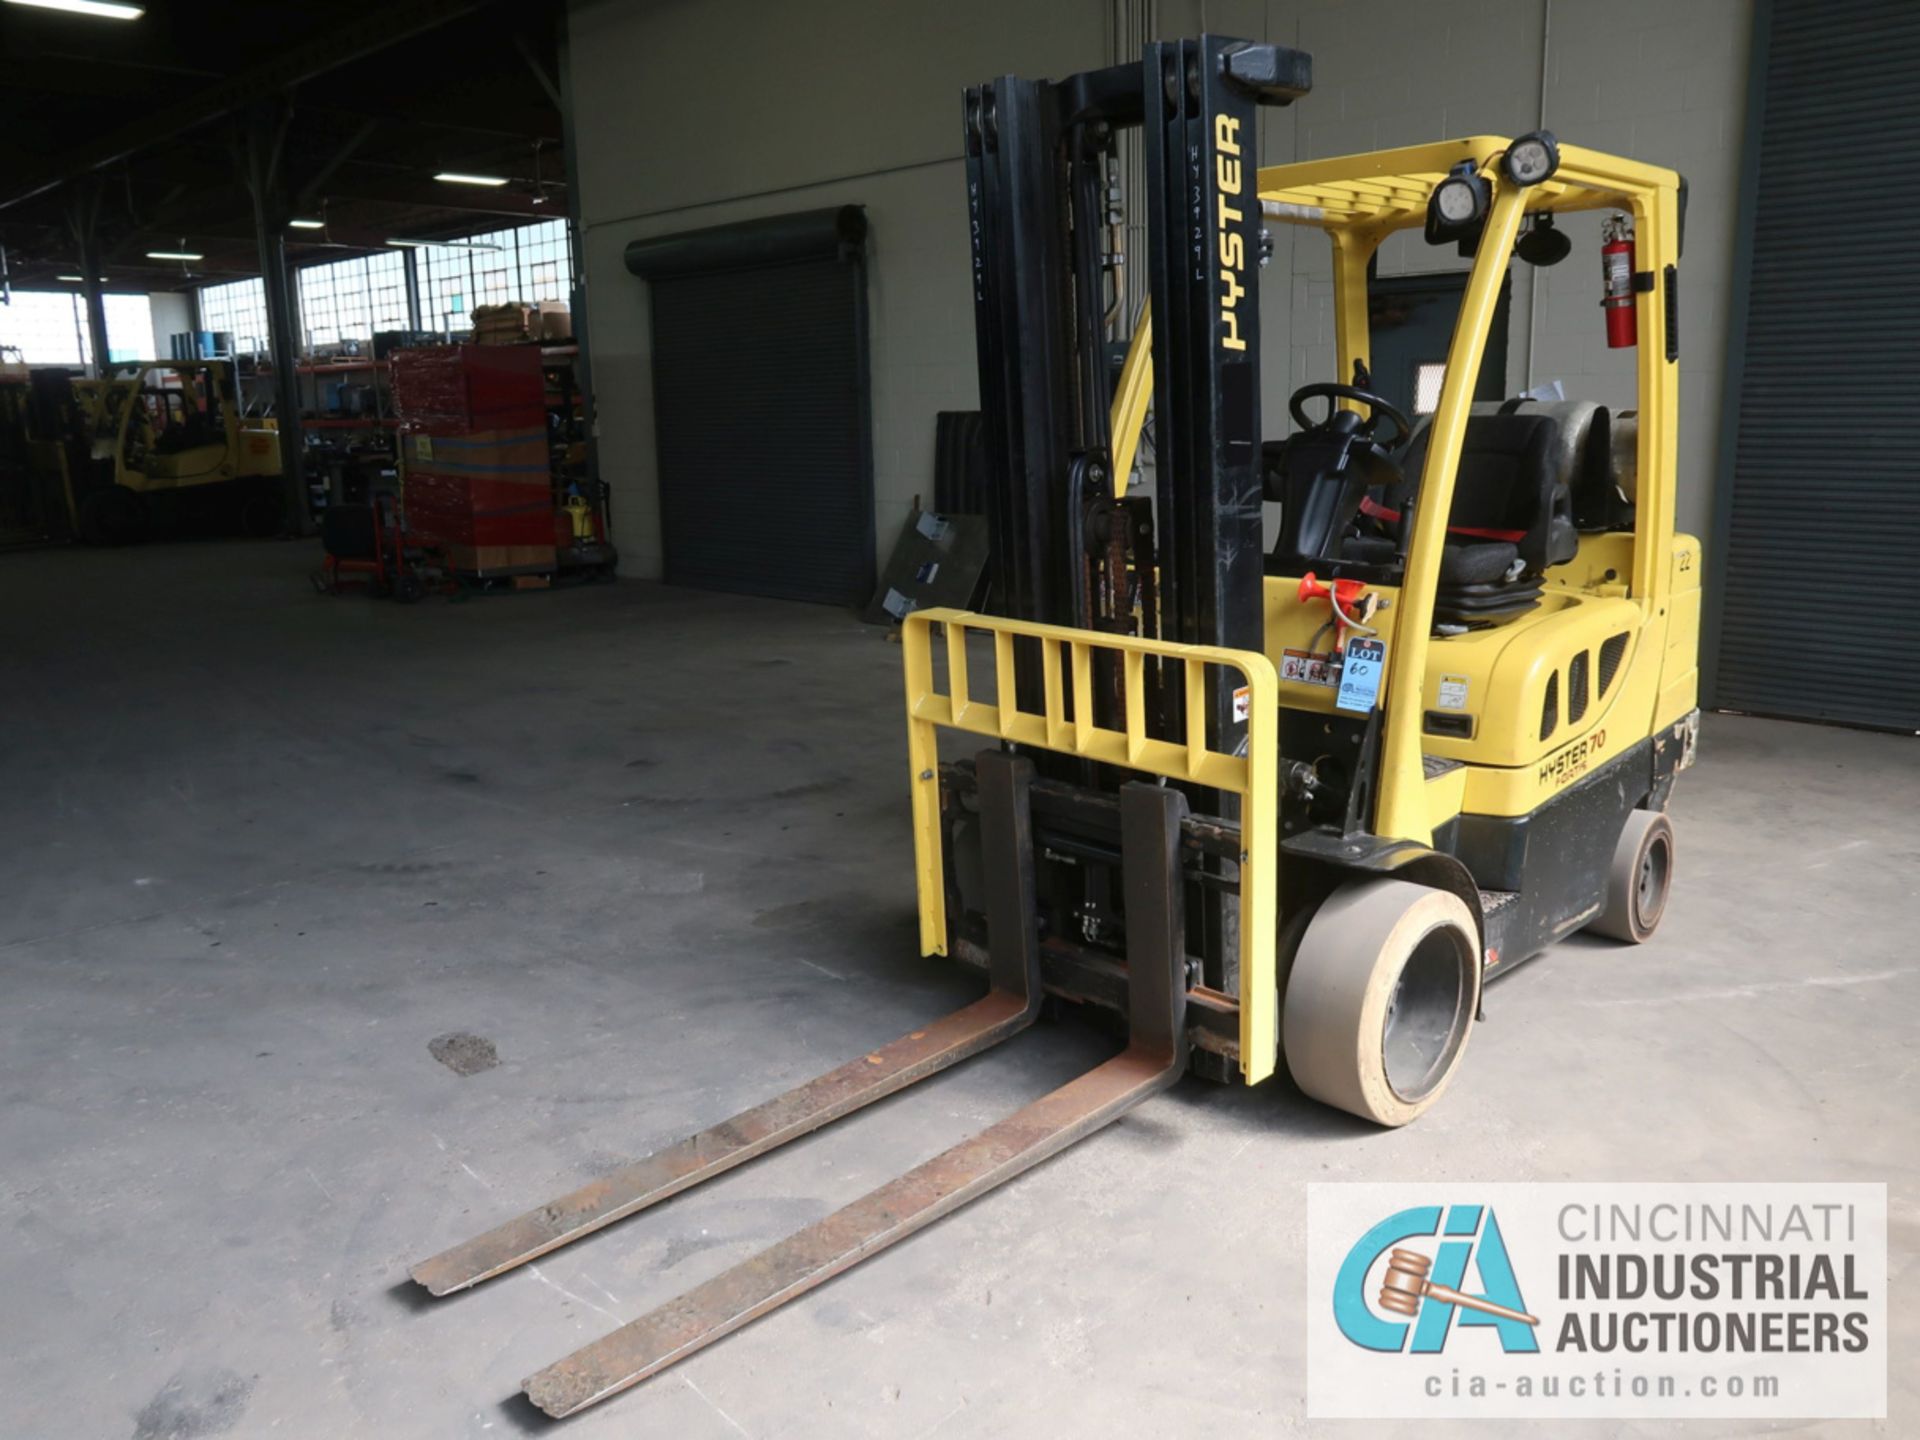 7,000 LB HYSTER MODEL S70FT LP GAS SOLID TIRE LIFT TRUCK WITH 3-STAGE MAST, 188" LIFT HEIGHT, 84"